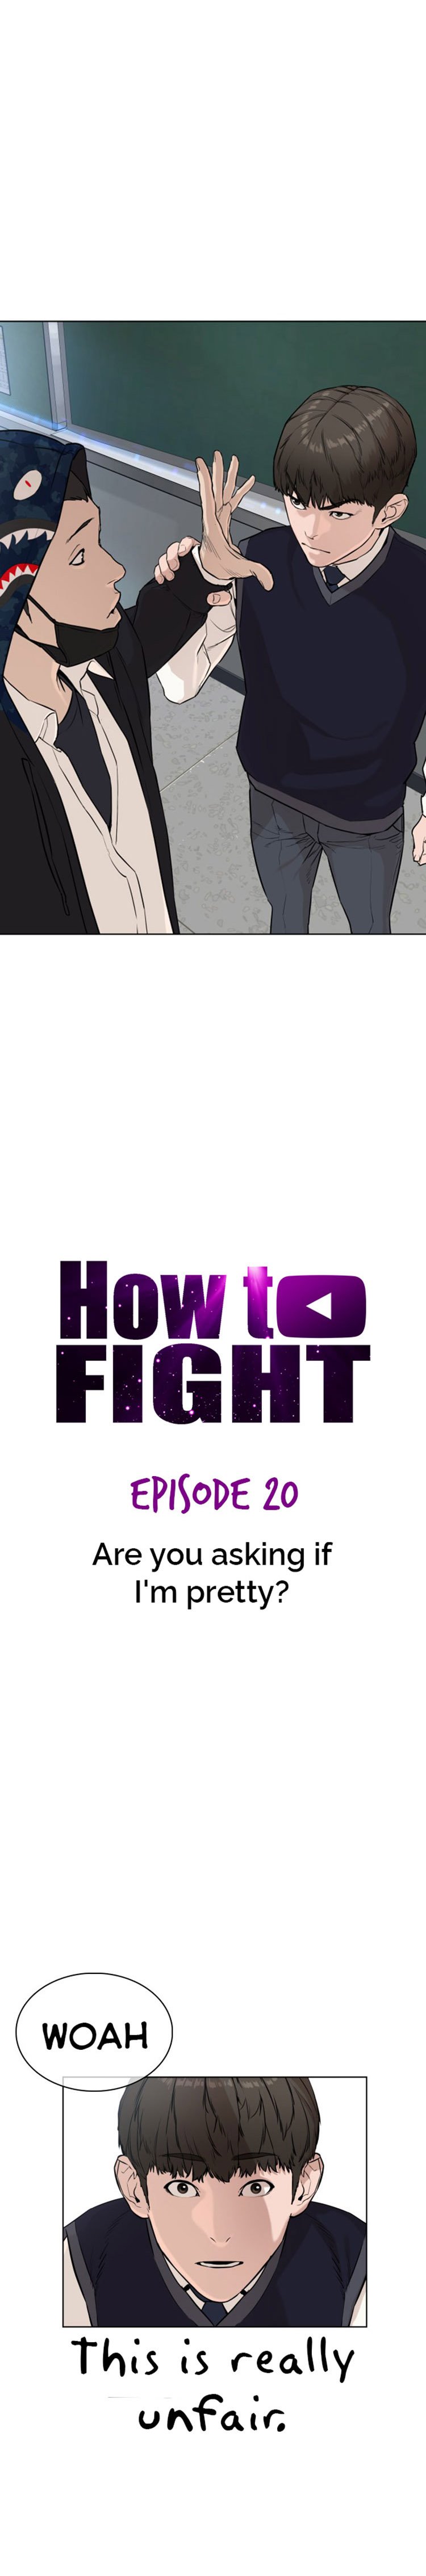 how-to-fight-chap-20-14